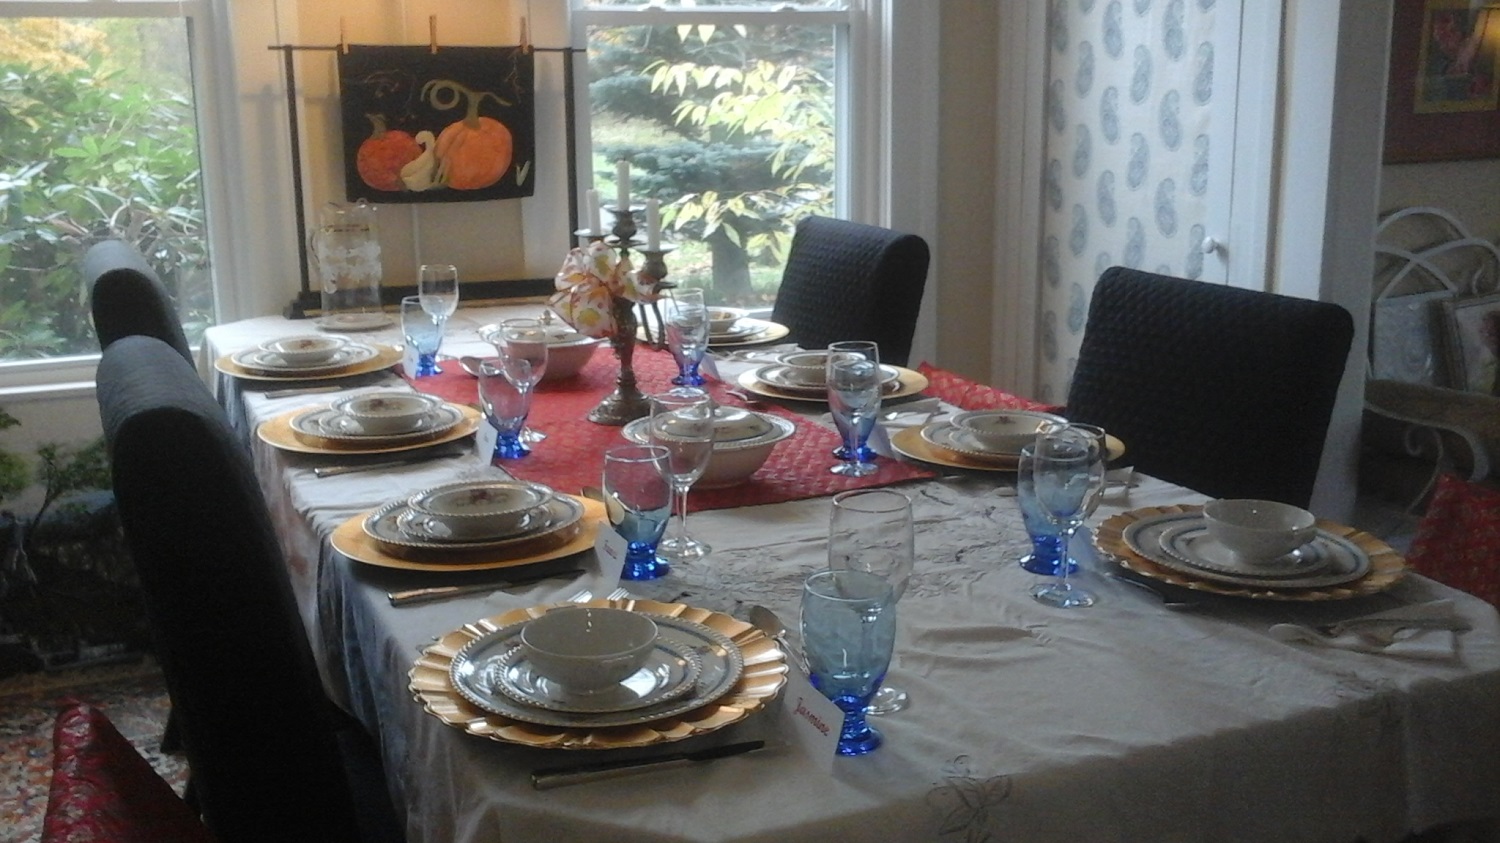 Jasmine's table set for a family gathering.